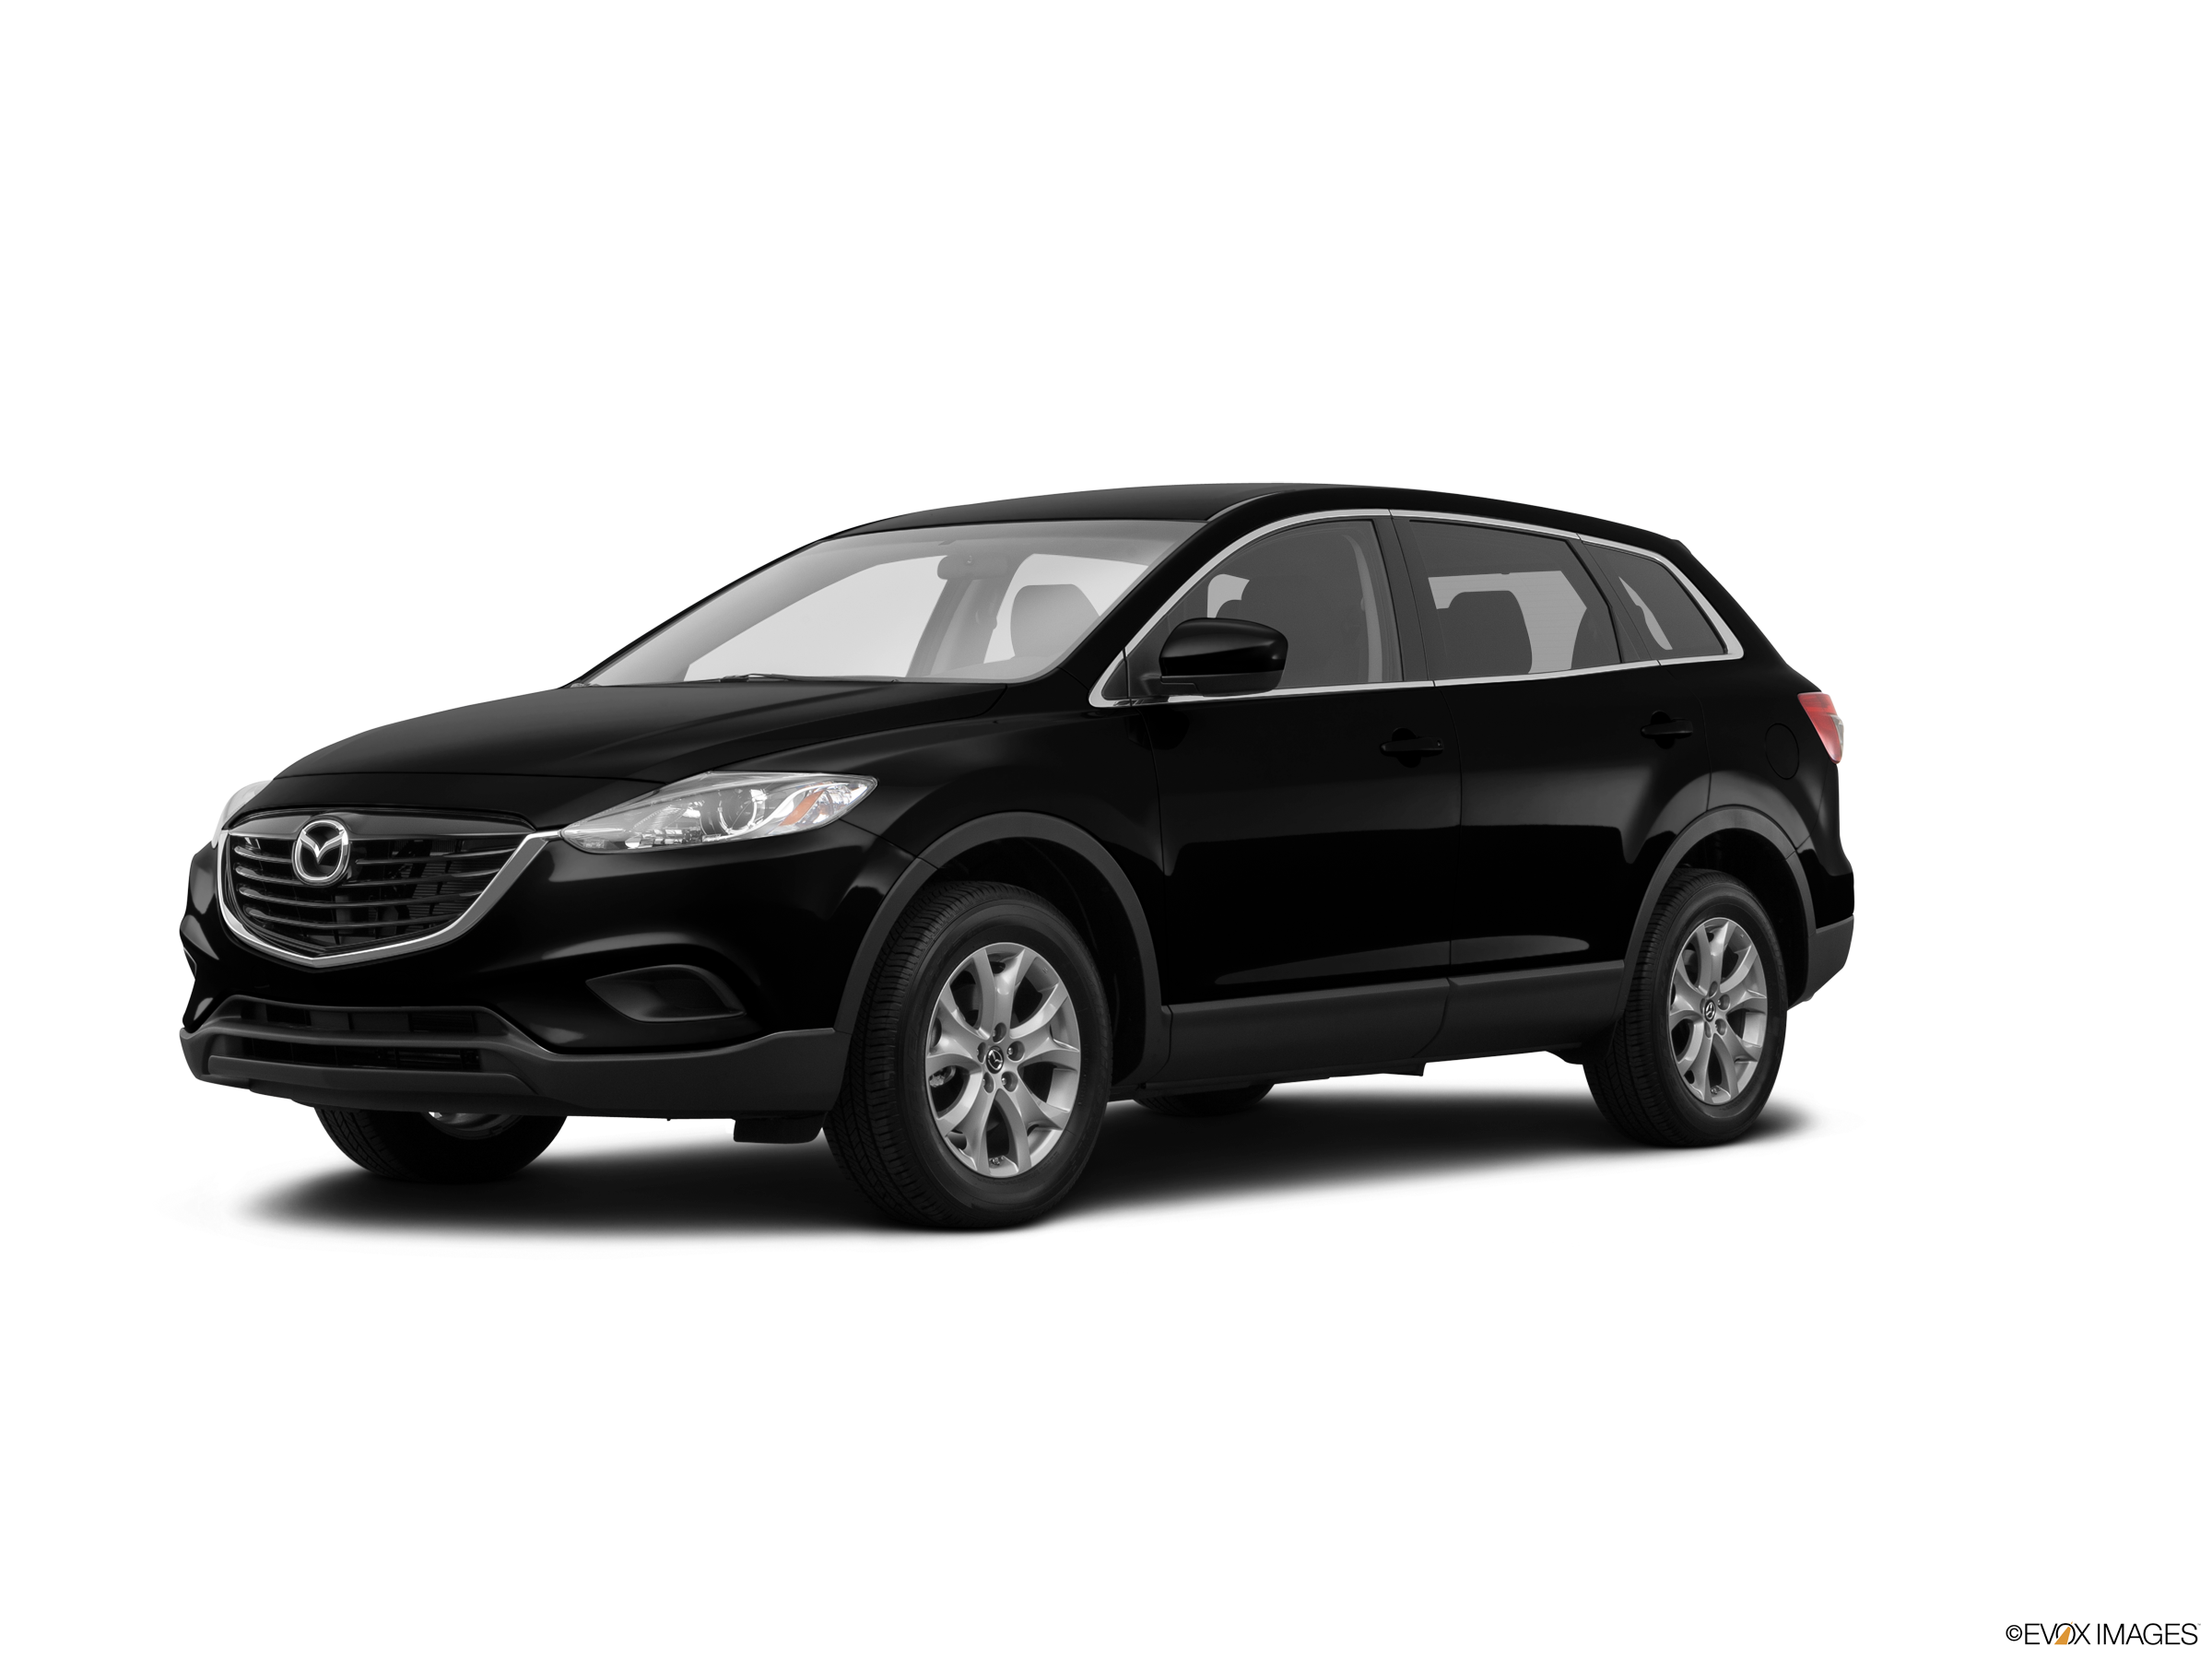 Used 2015 Mazda Cx 9 Sport Suv 4d Pricing Kelley Blue Book